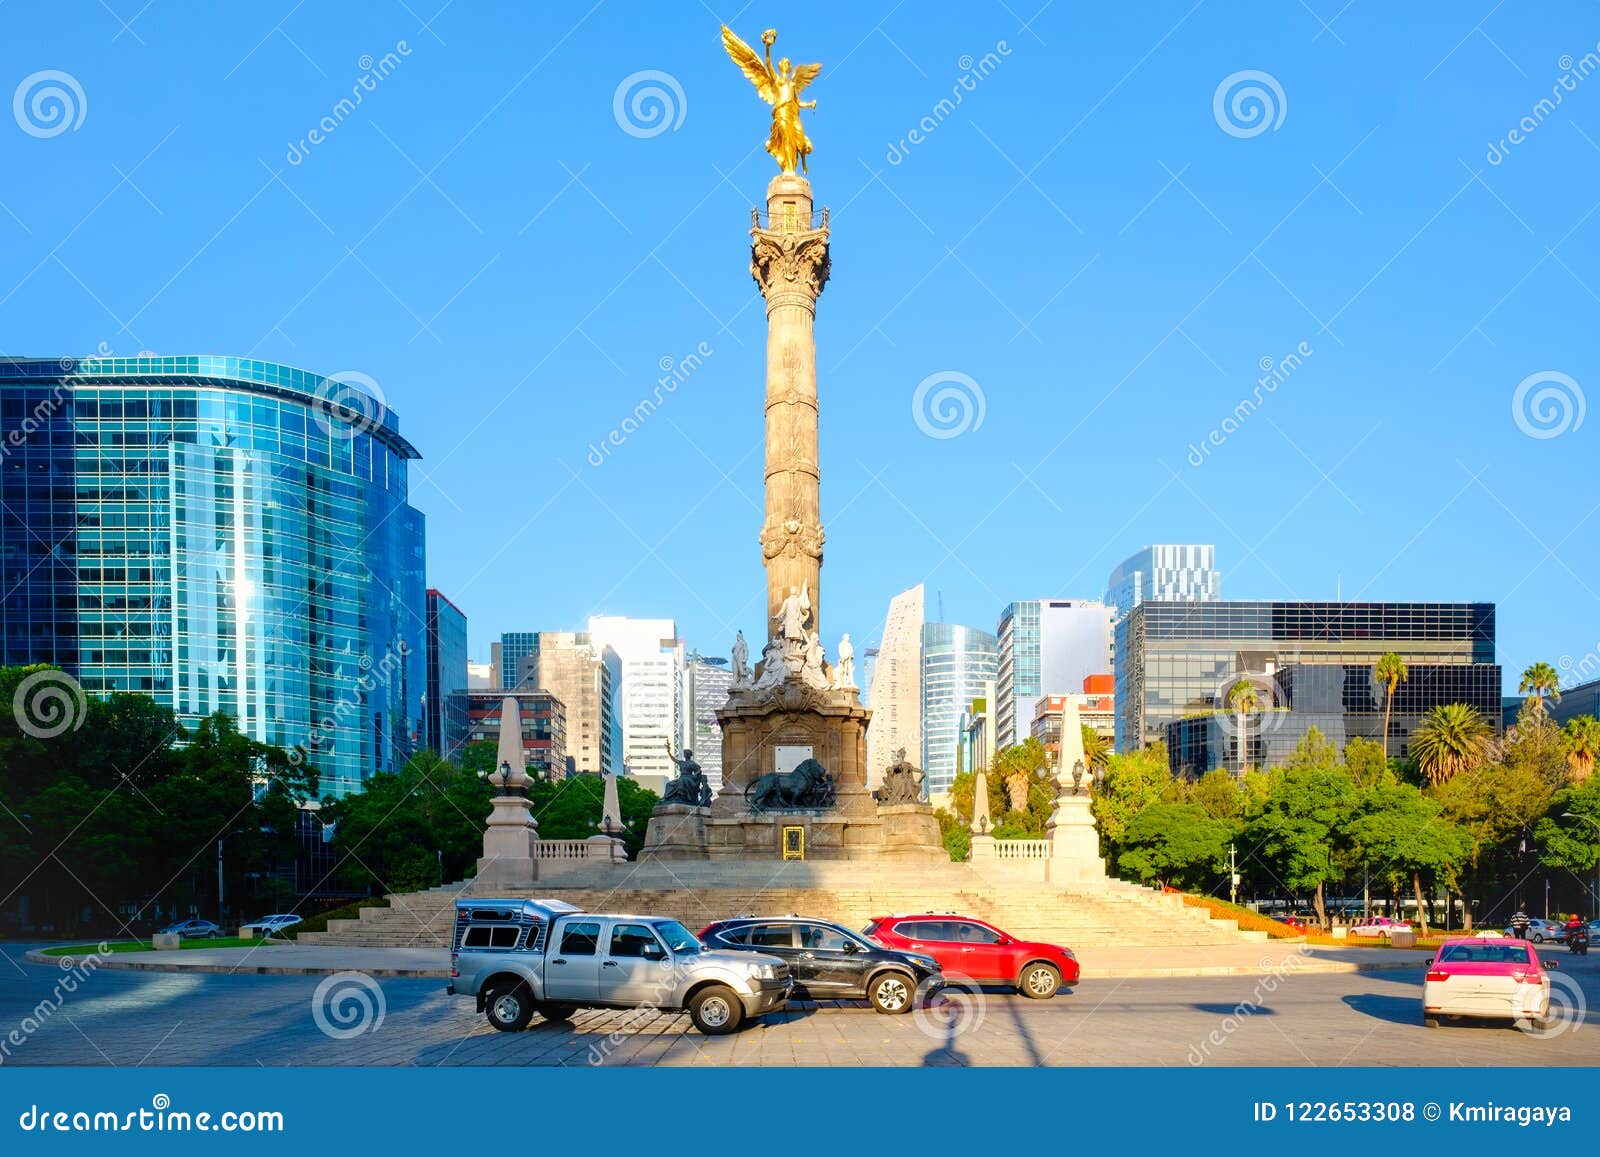 the angel of independence at paseo de la reforma in mexico city